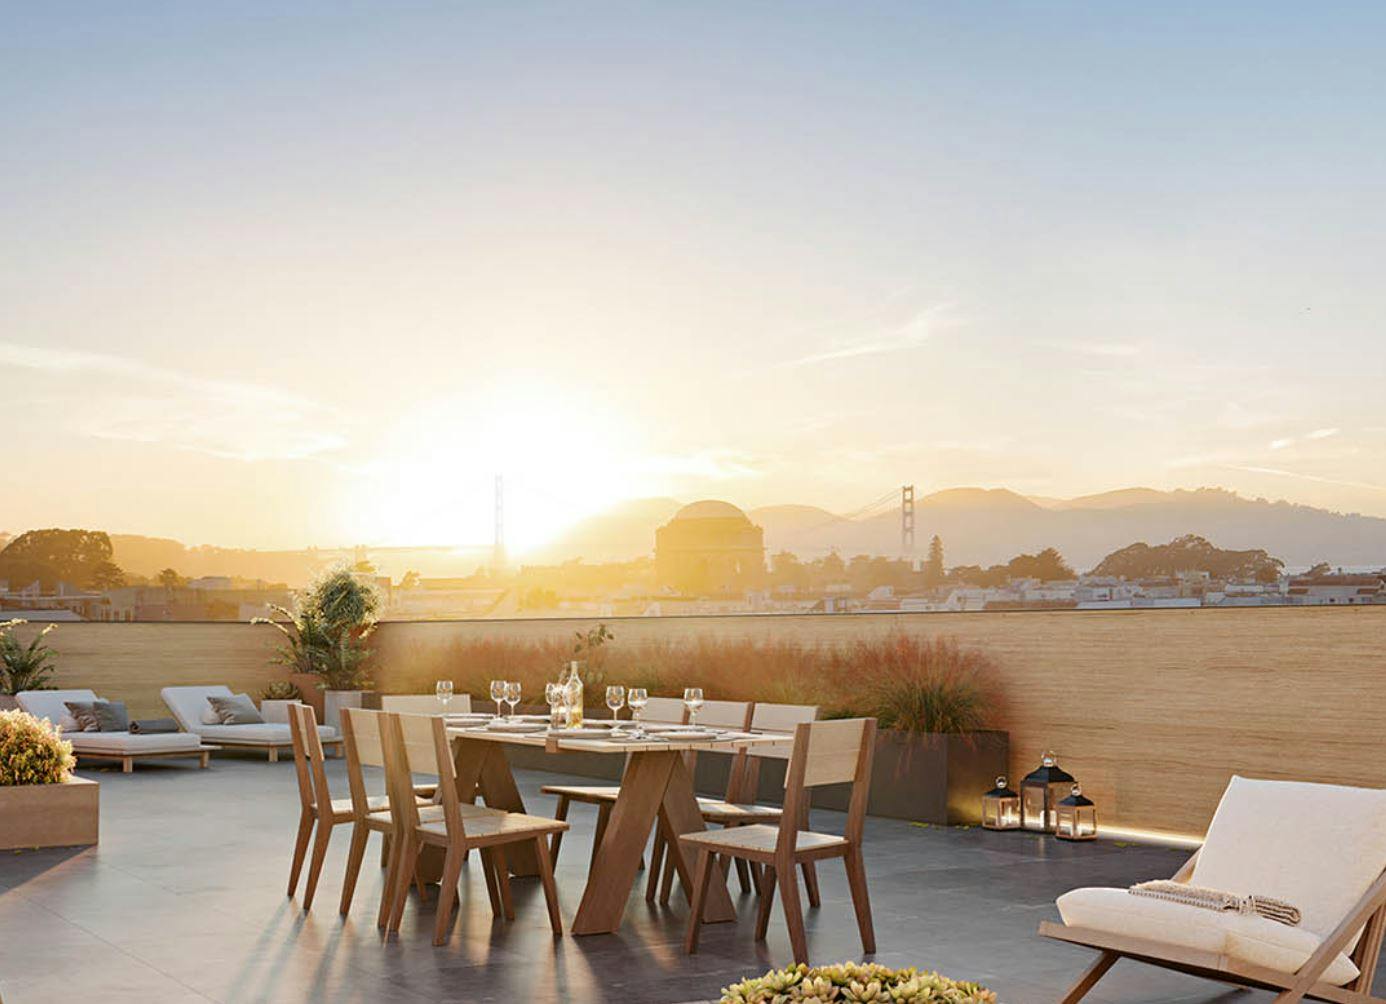 The roof deck of Maison Au Pont, equipped with lounge seating and a grill, has marvelous city and bay views that take advantage of the structure's location in the Marina District. Photo courtesy of maisonaupontsf.com